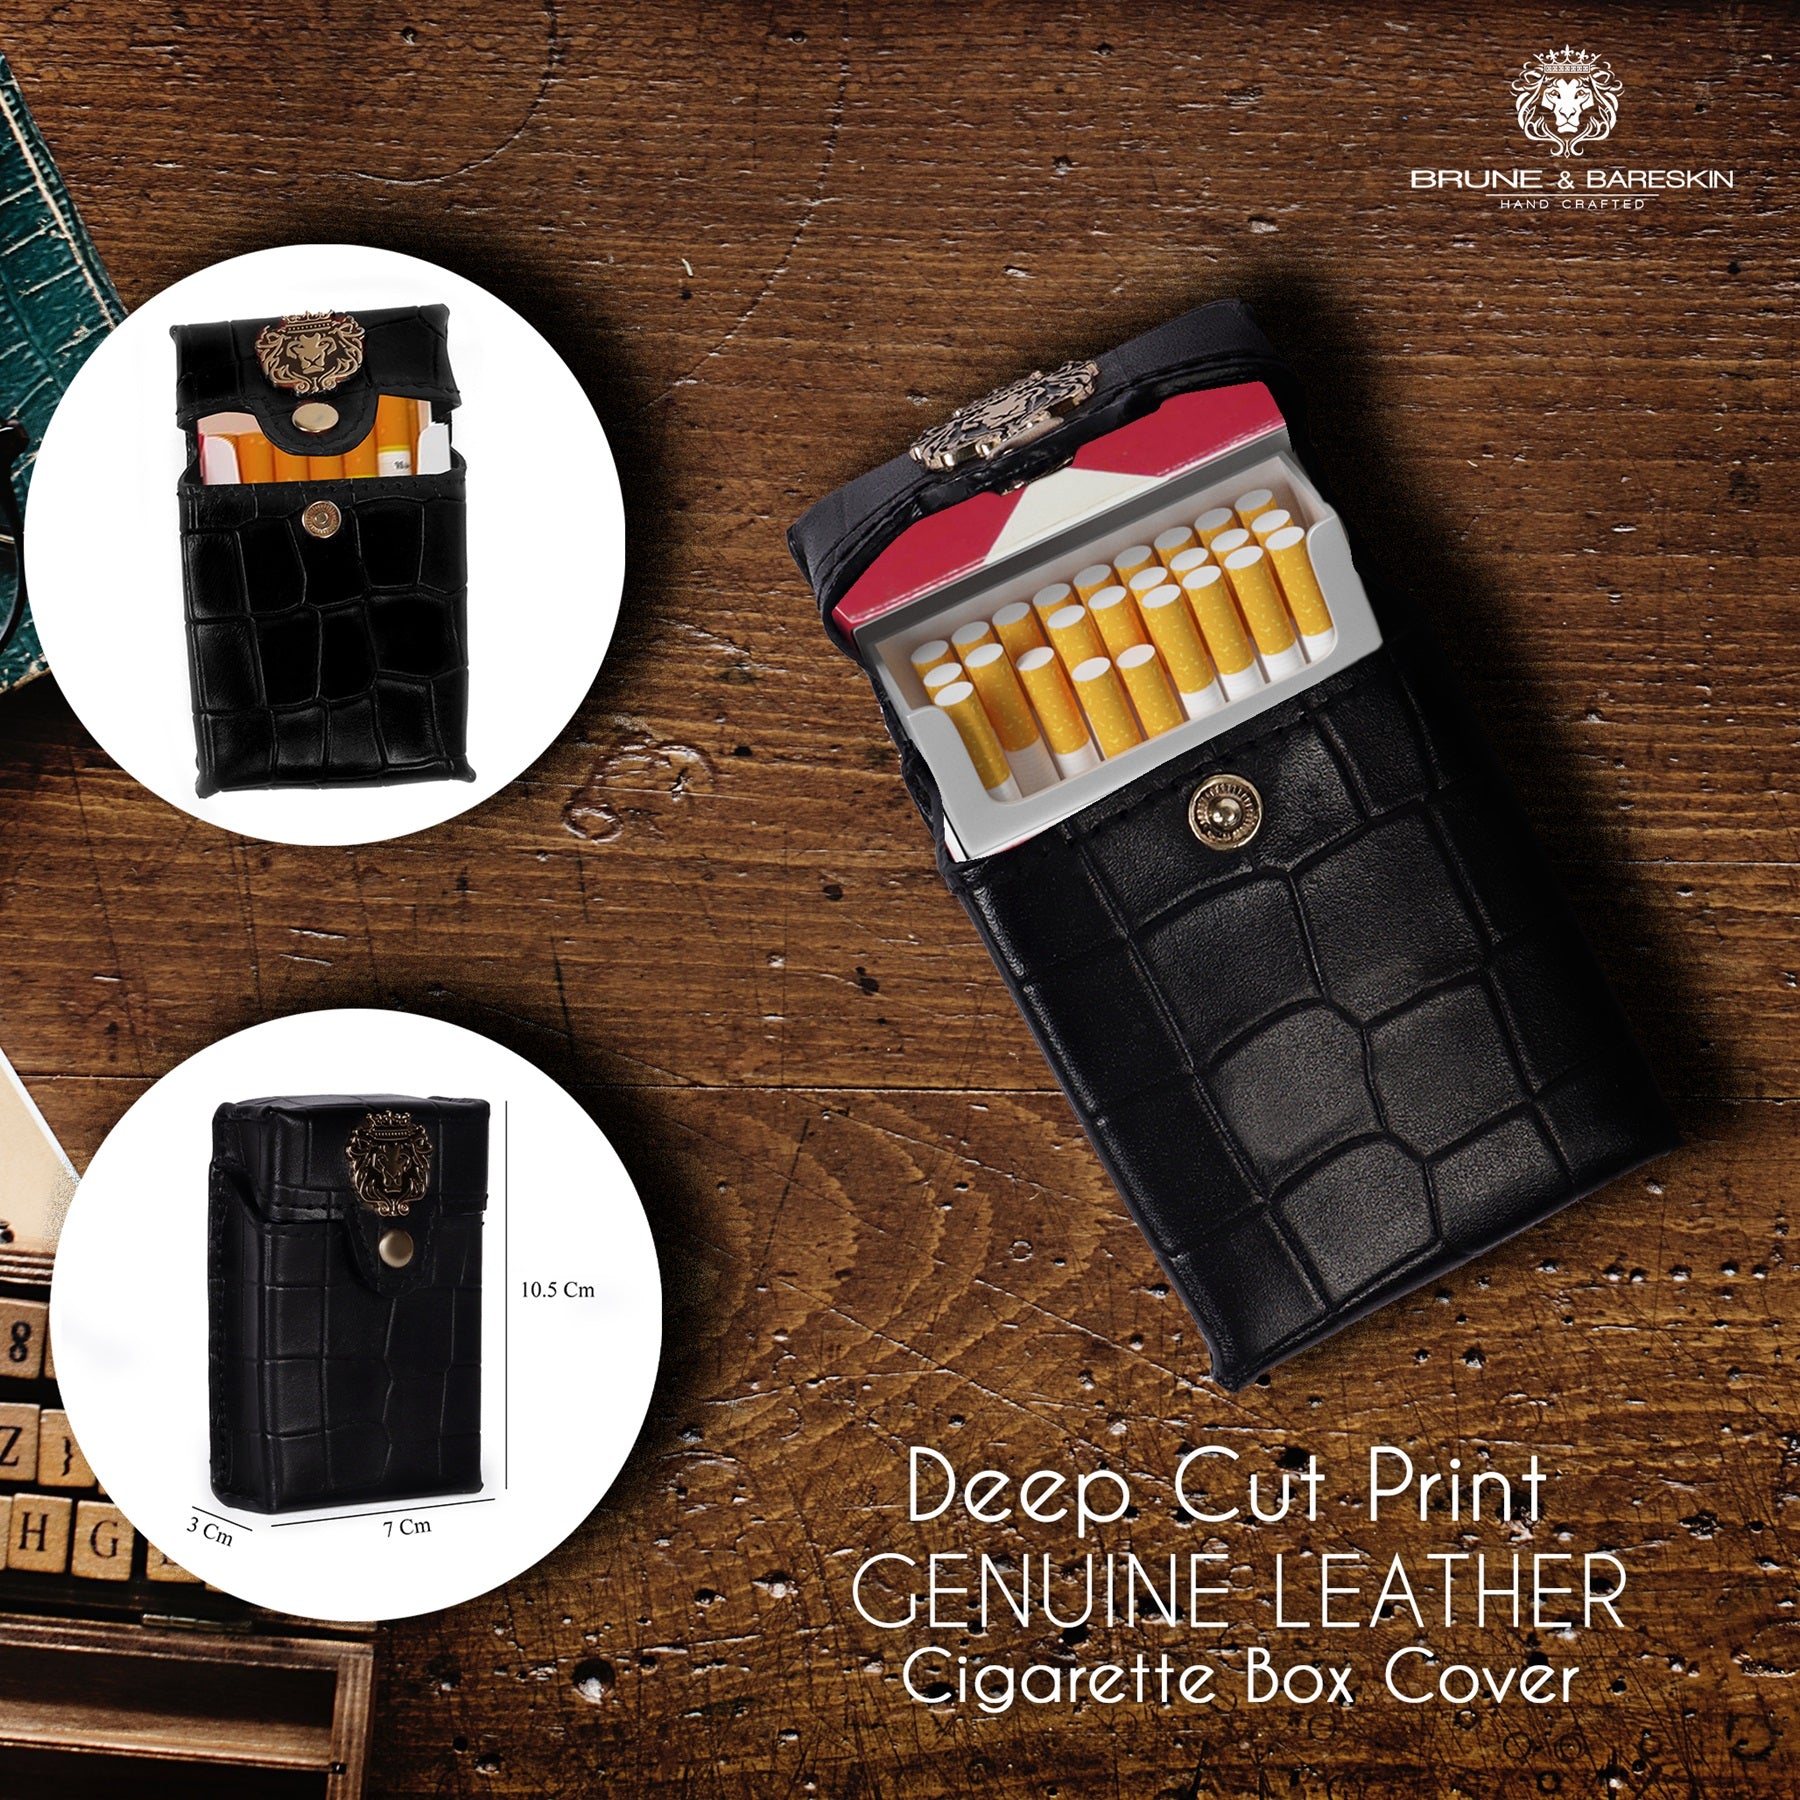 Buy Luxury Black Leather Cigarette Case Online in India - Etsy